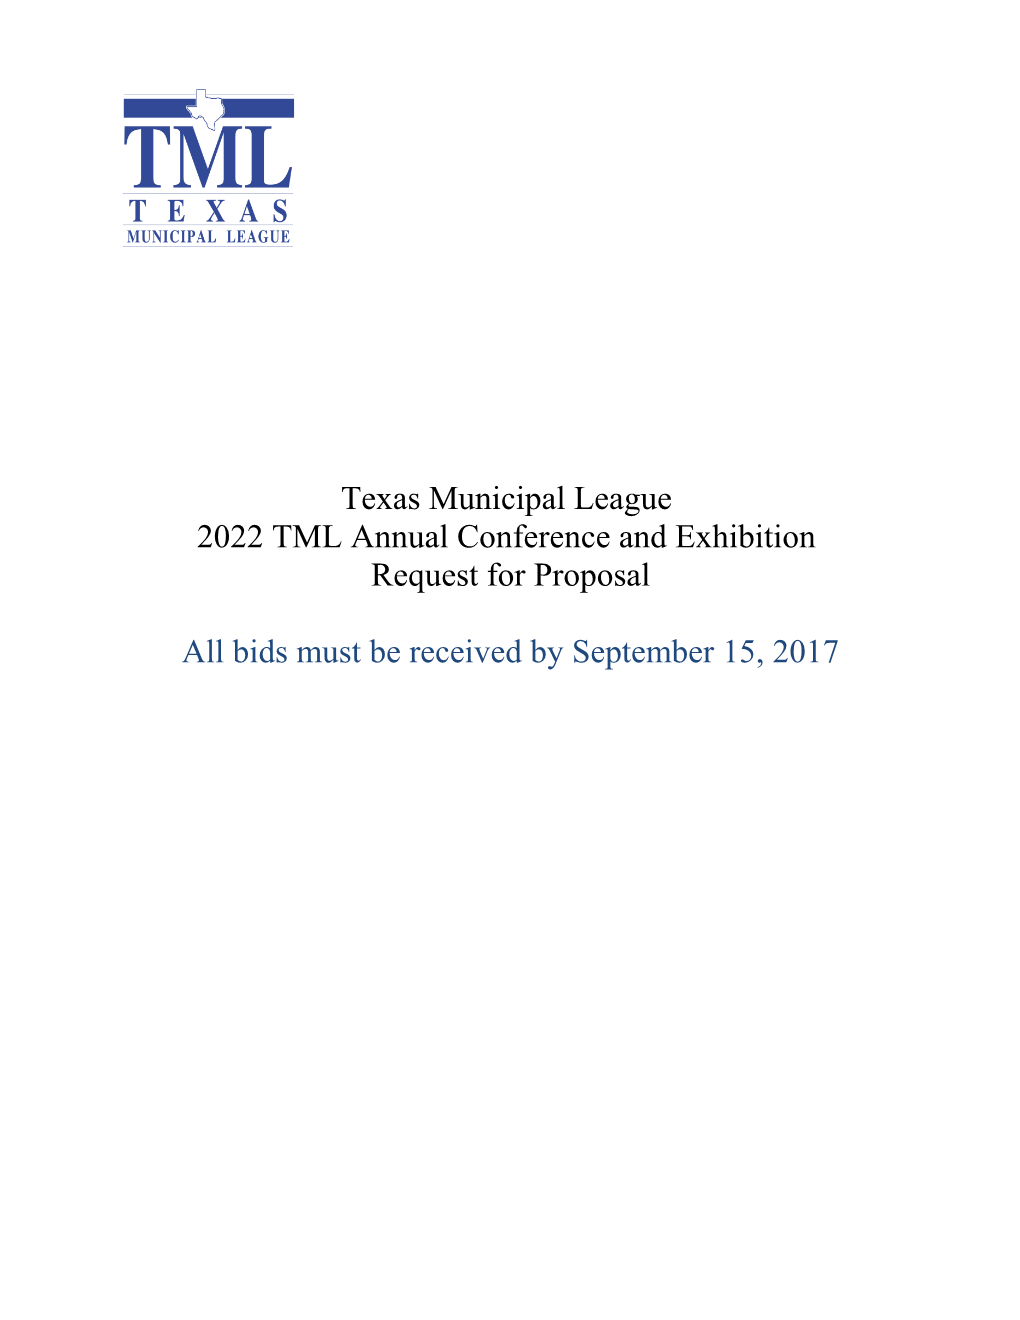 Texas Municipal League 2022 TML Annual Conference and Exhibition Request for Proposal